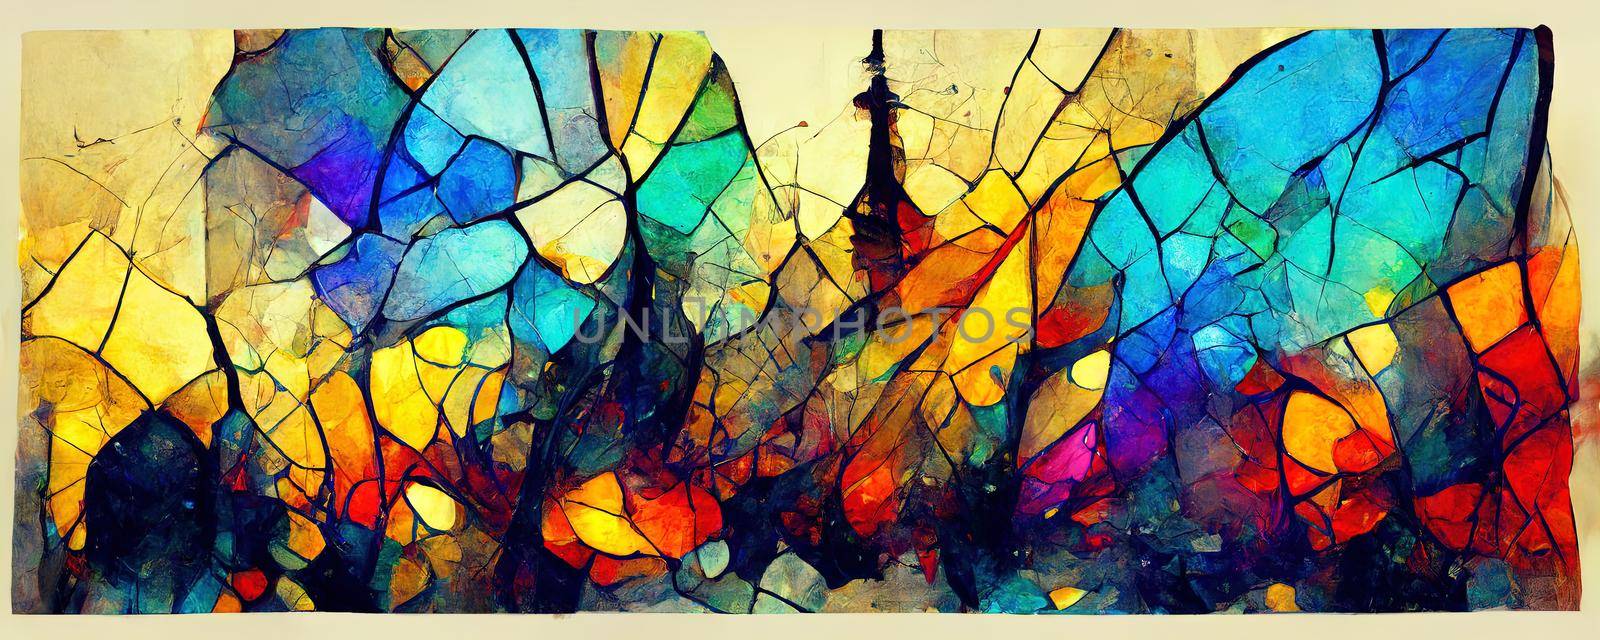 multi-colored glass window, Colorful abstract wallpaper texture background illustration by TRMK